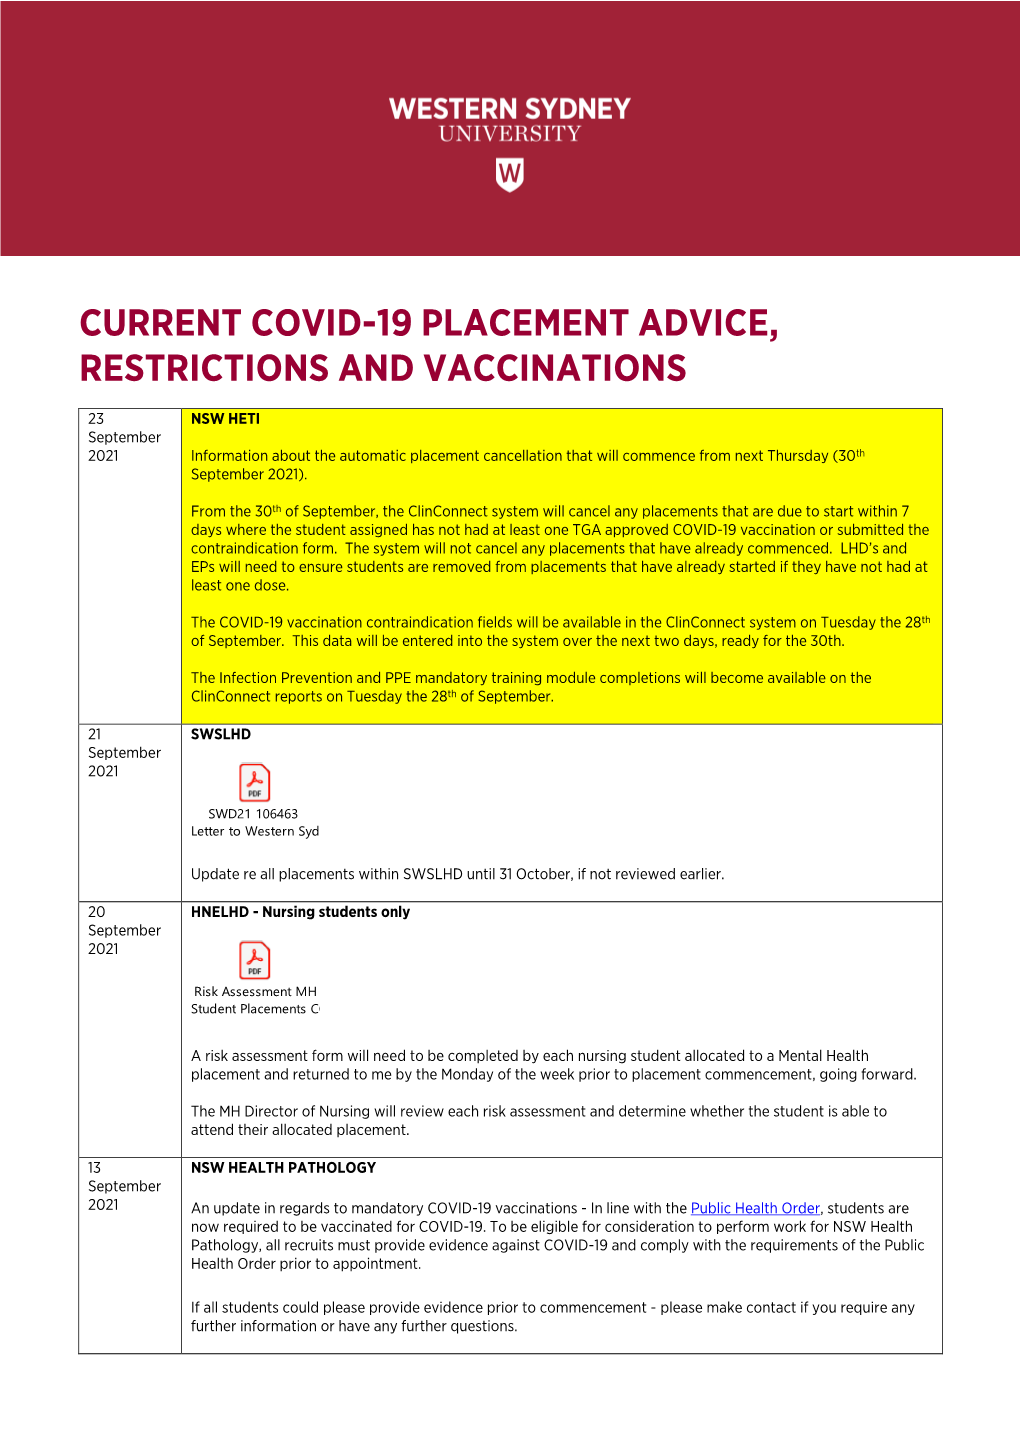 Current Covid-19 Placement Advice, Restrictions and Vaccinations